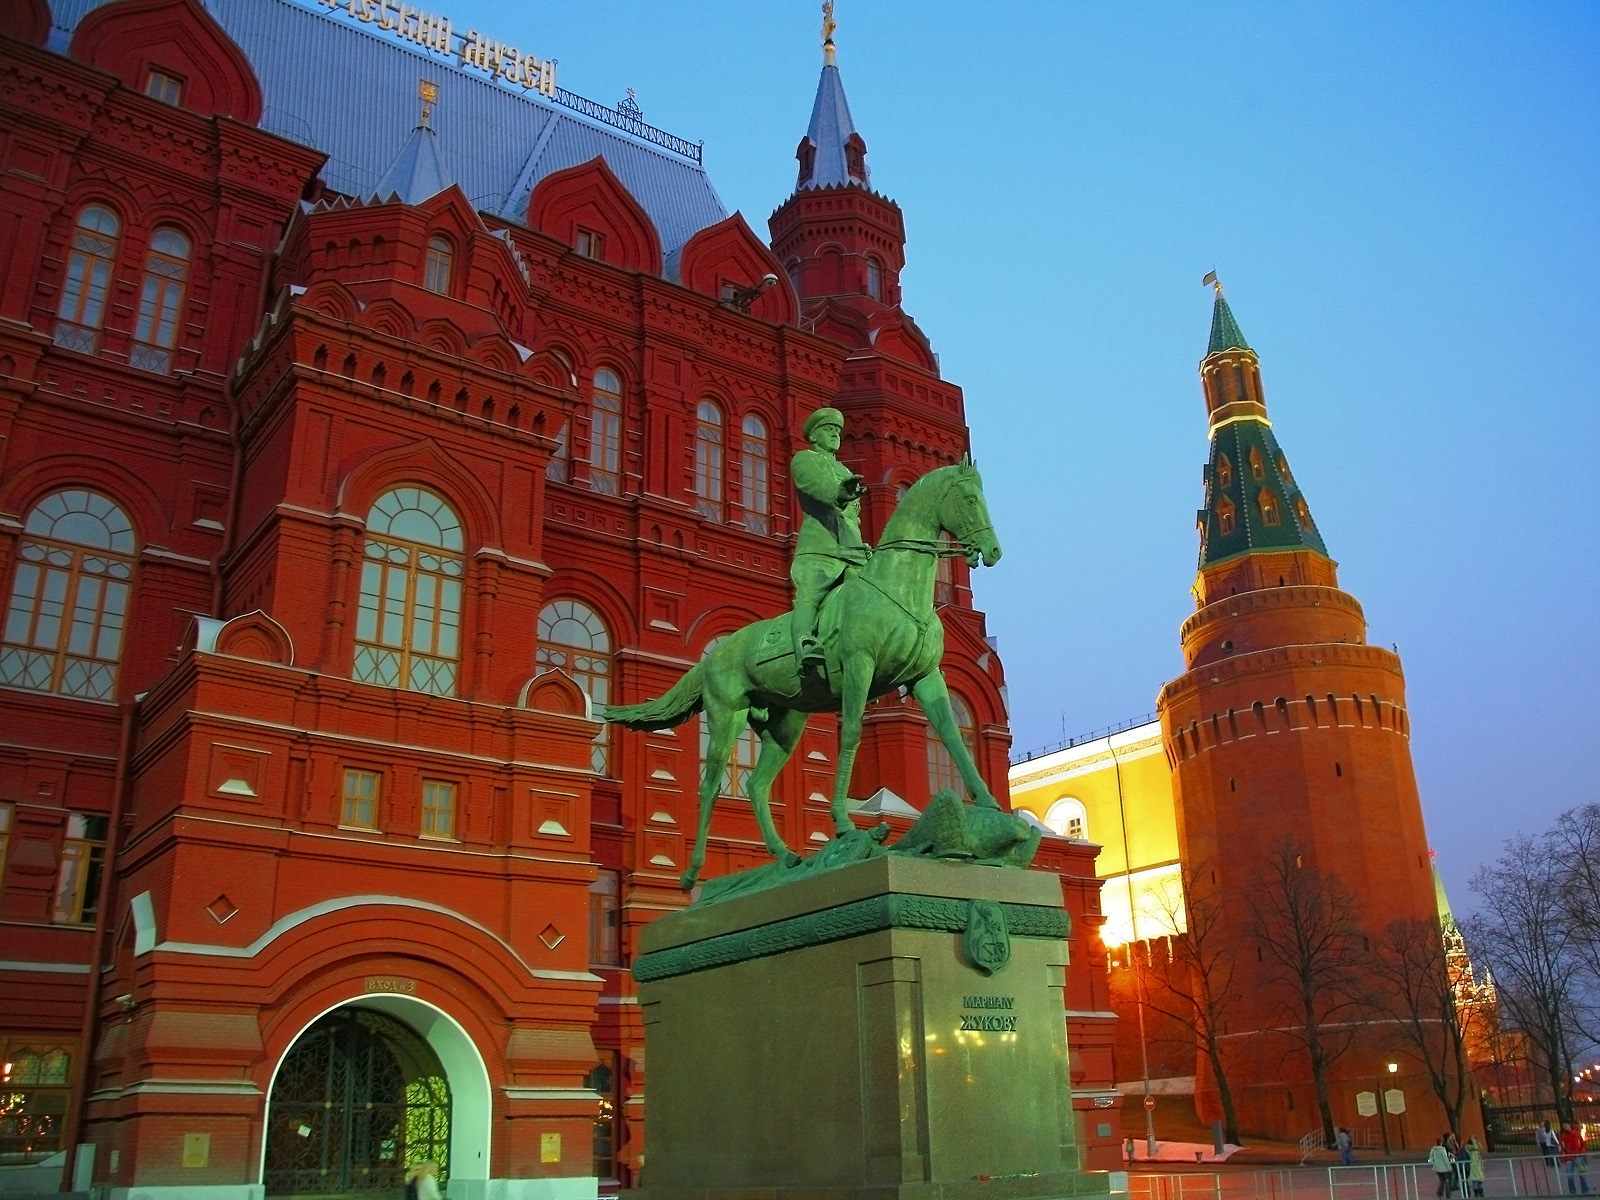 Marshall Zhukov Equestrian Statue and State Historical Museum 1600 x 1200